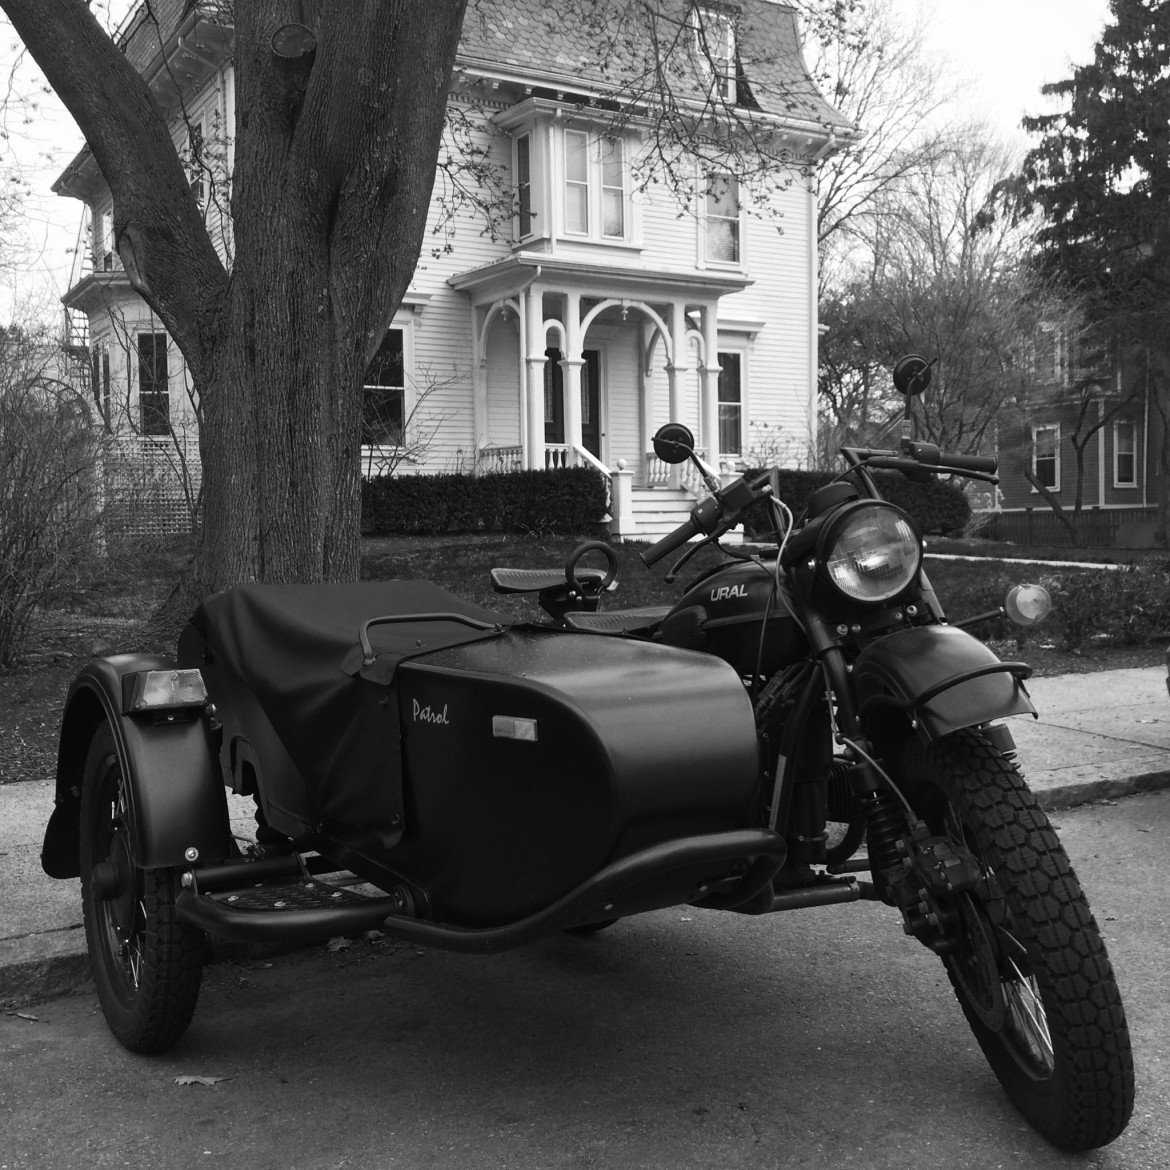 Ural sidecar motorcycle parked on Burroughs Street. April 2014.